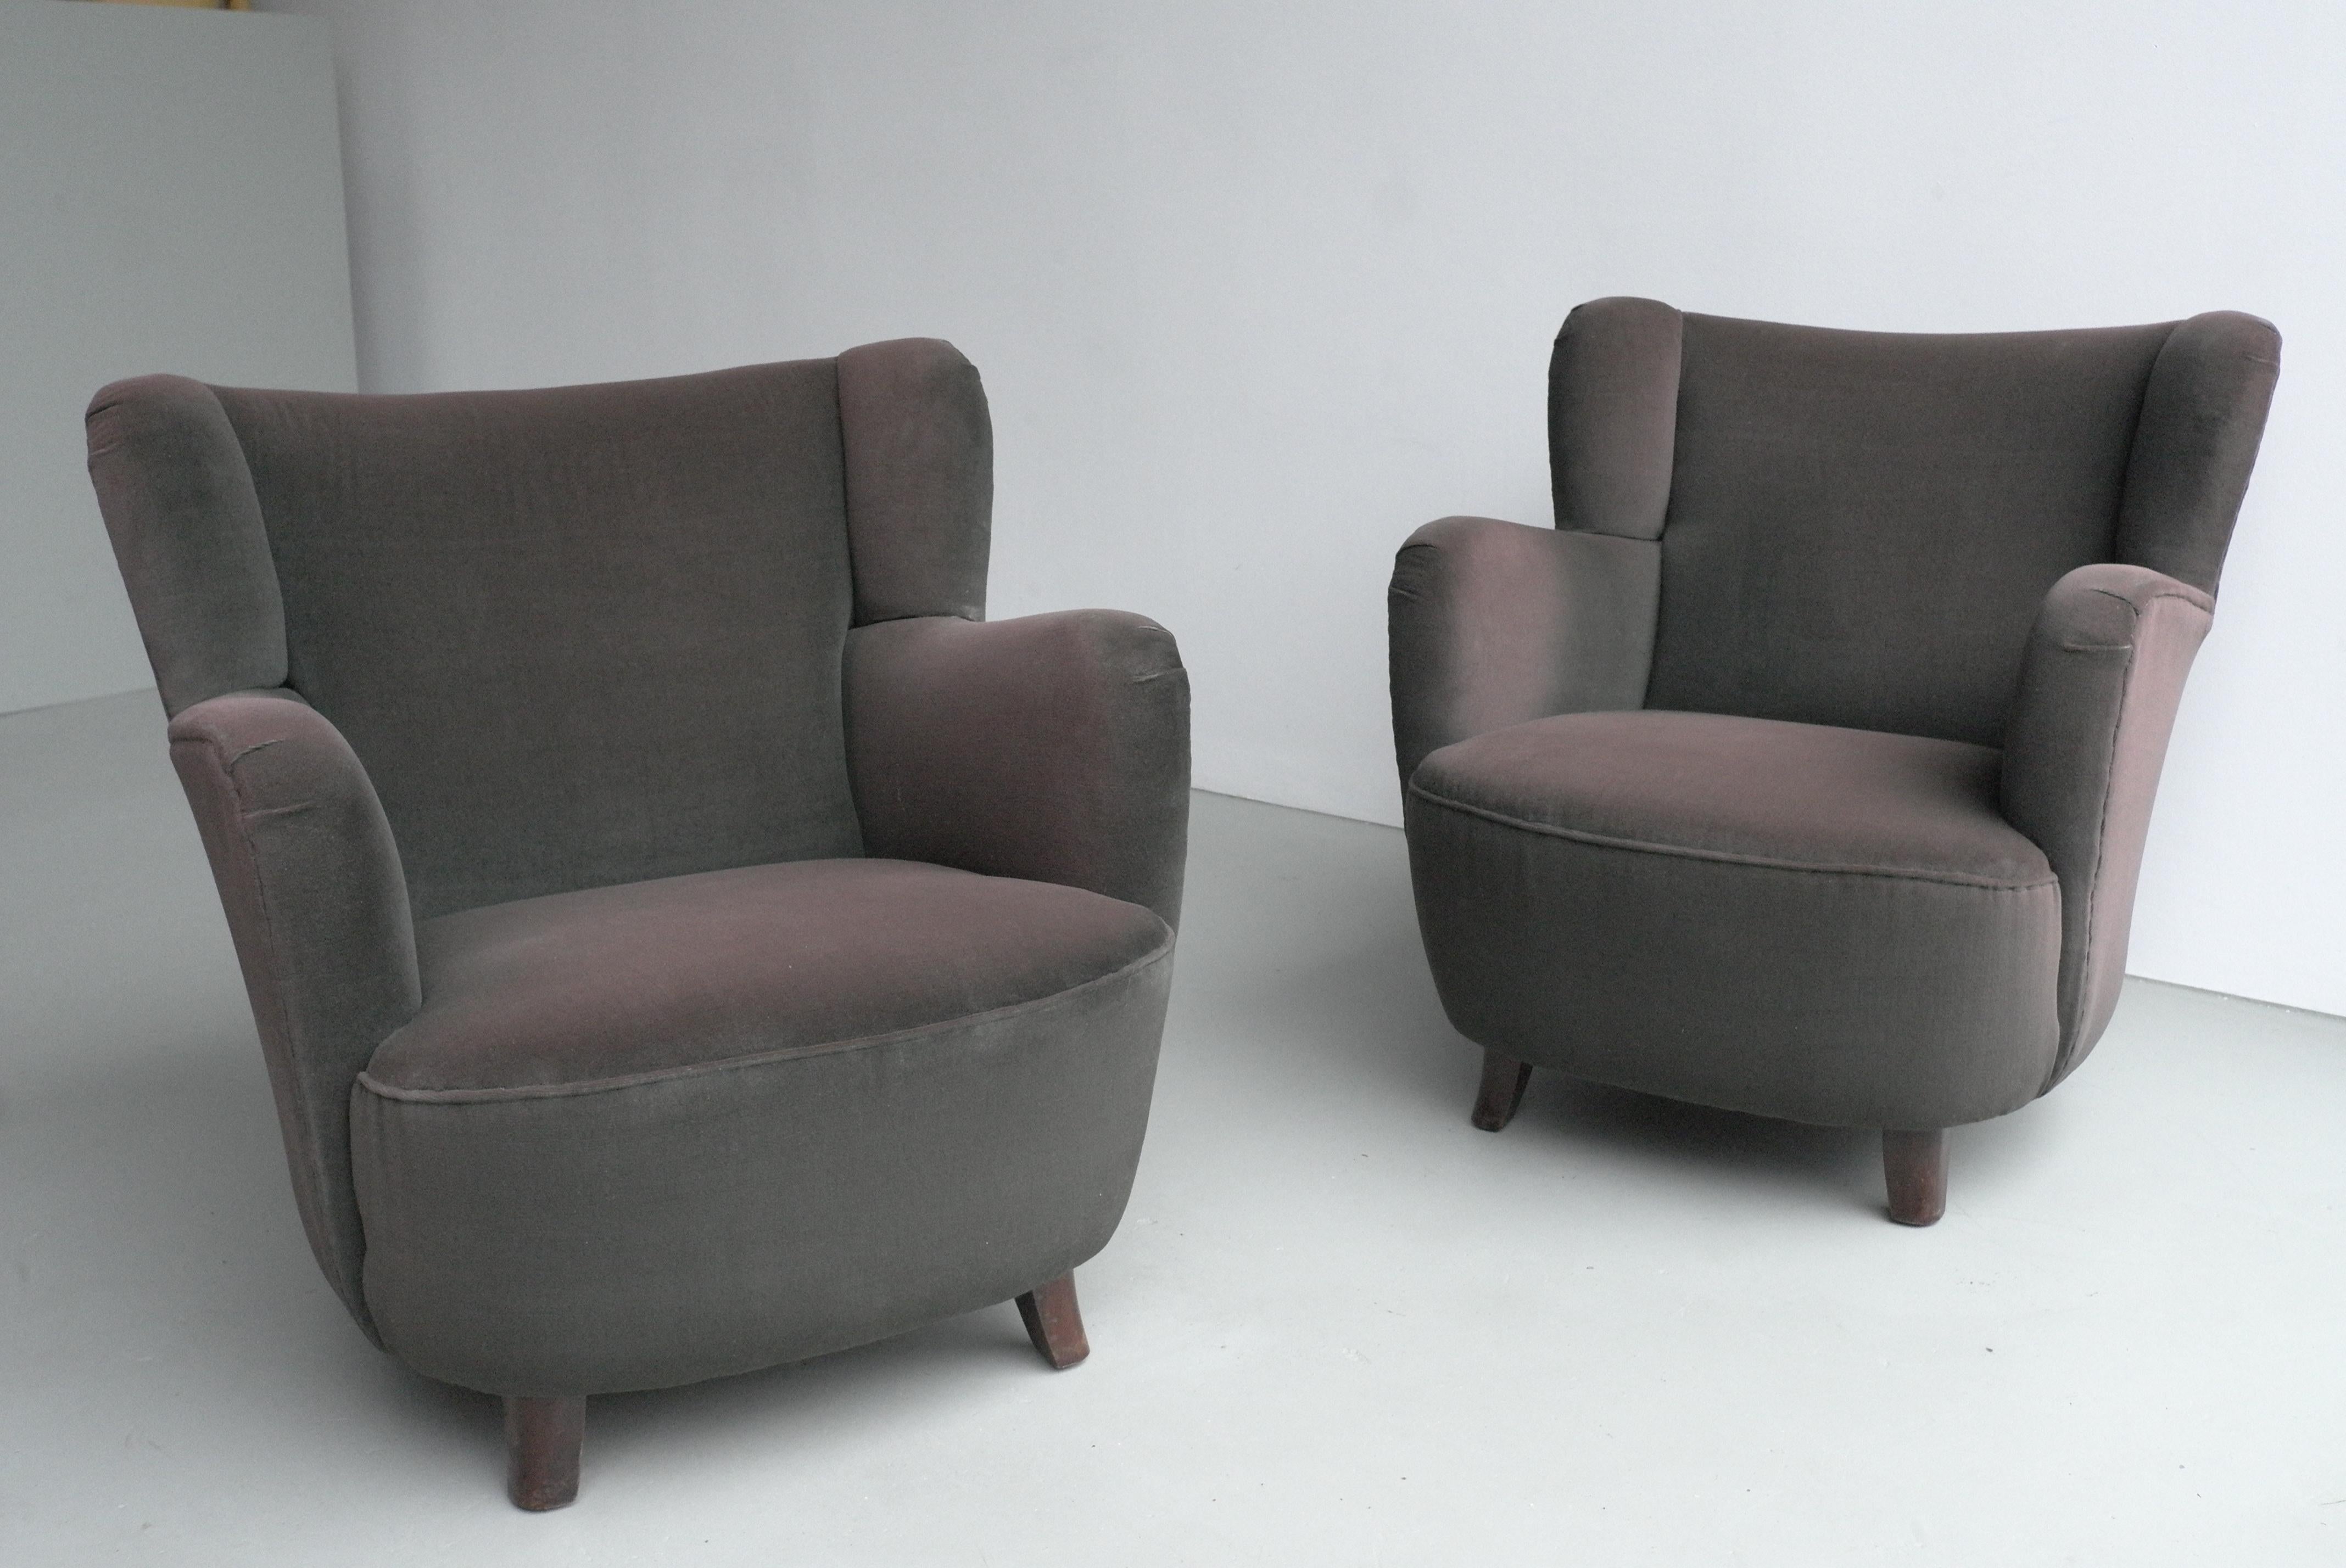 Pair of Mid-Century Modern Danish Lounge Chairs in Brown Eggplant Glow Velvet For Sale 6